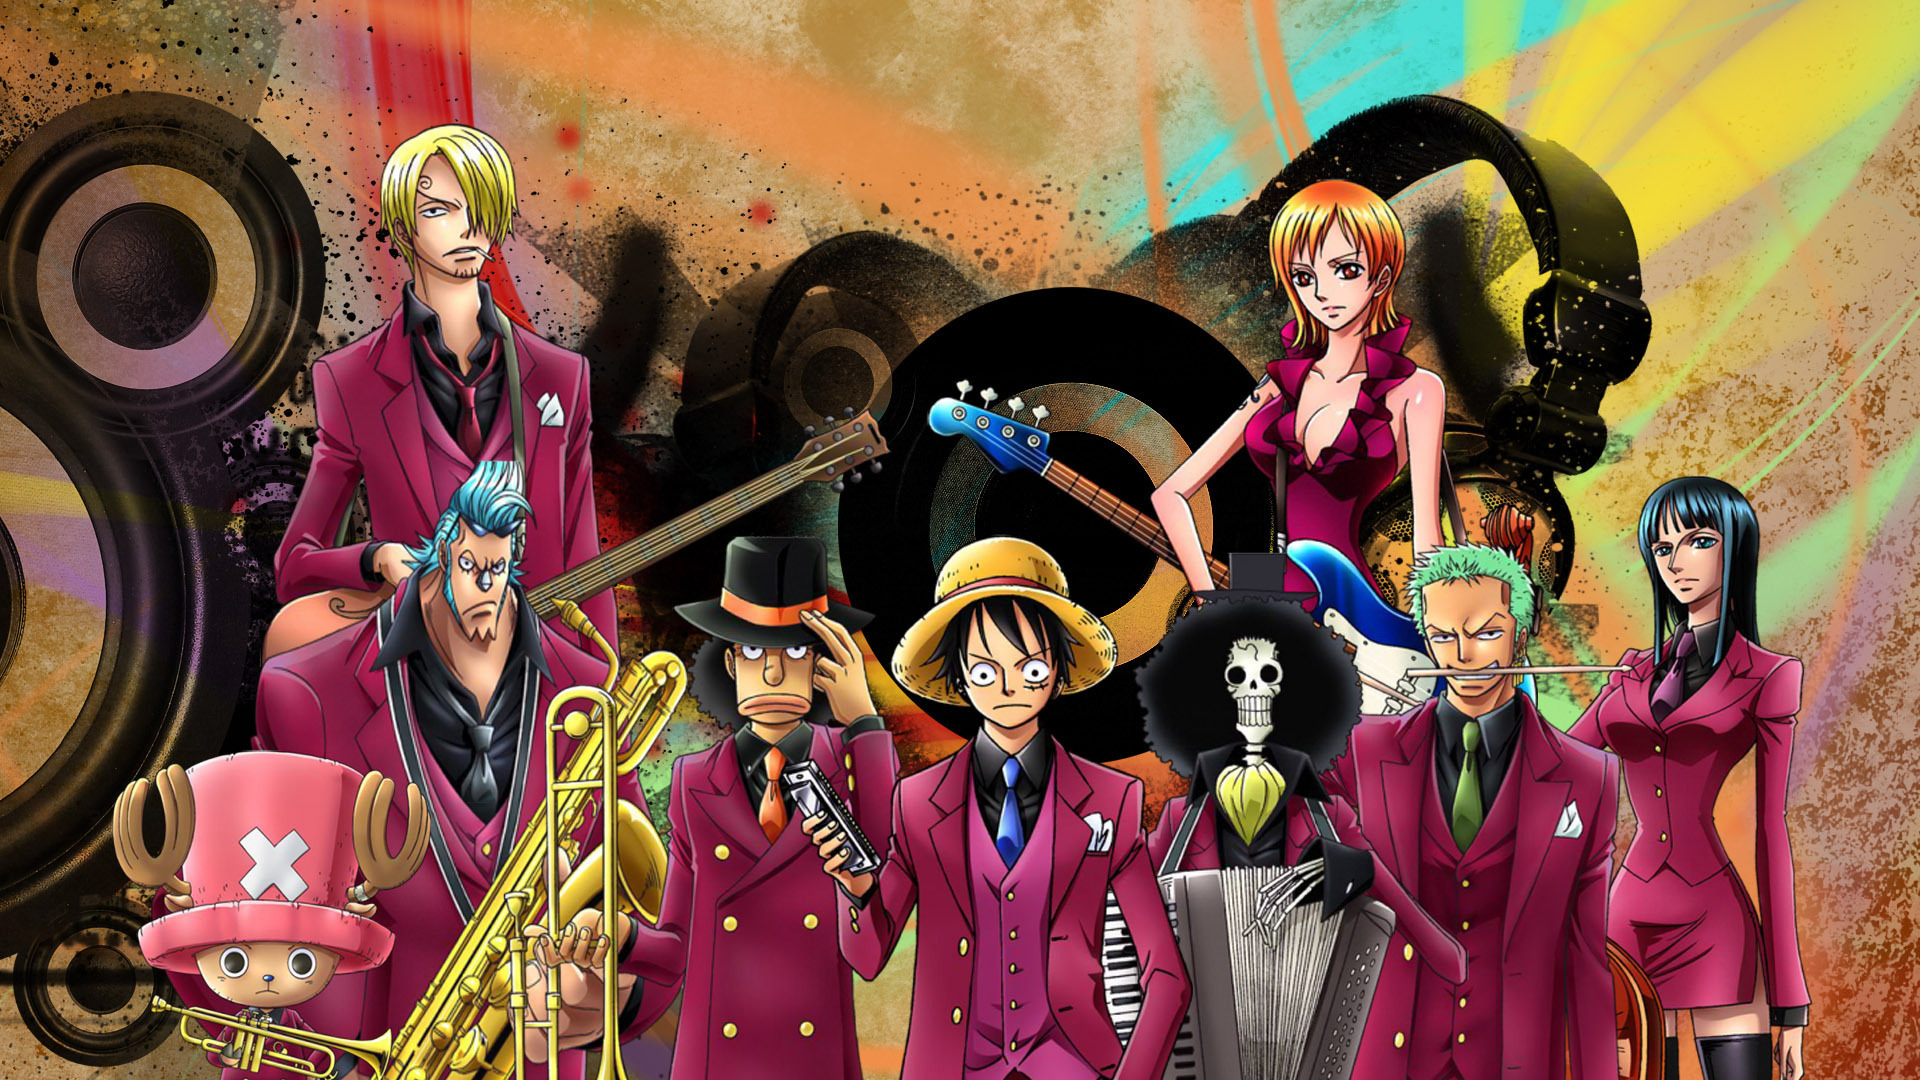 ONE PIECE Band 15